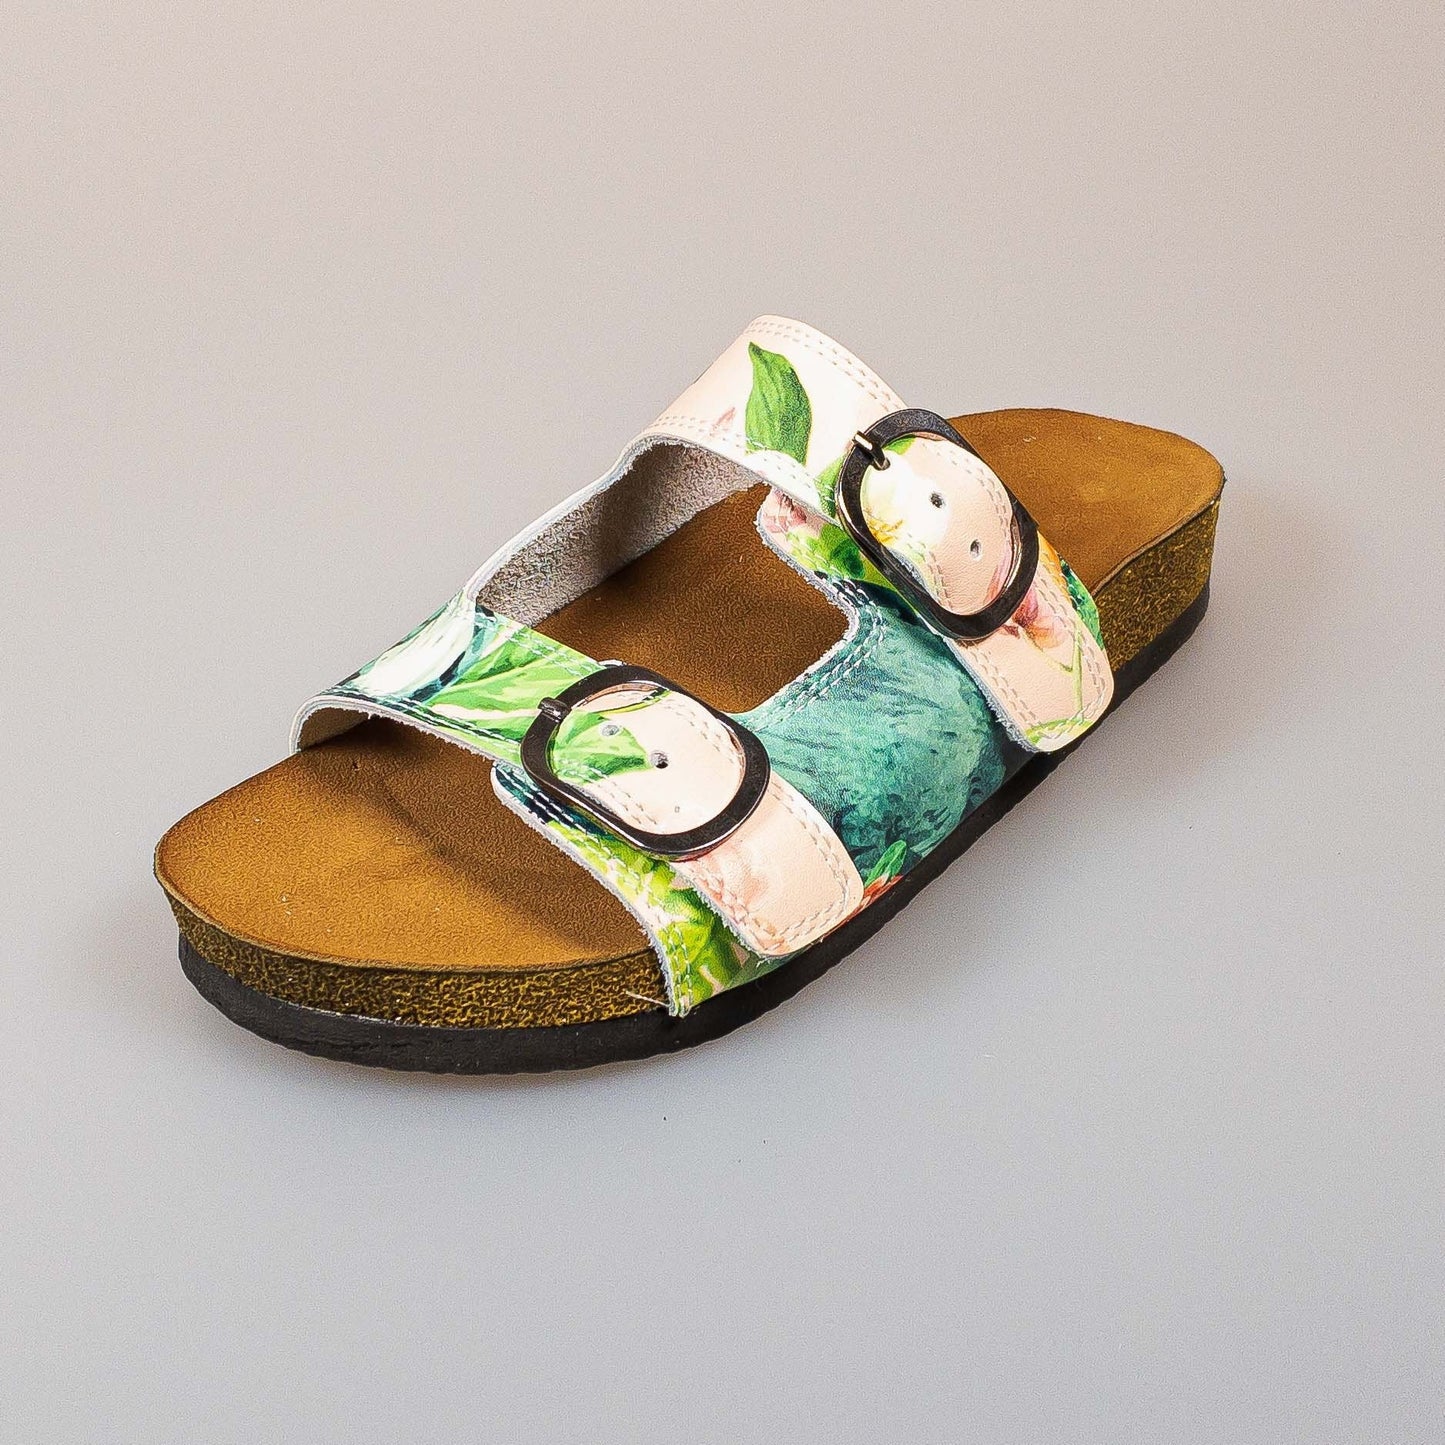 Tropical Leather Open Toe Sandals Clogs Slippers